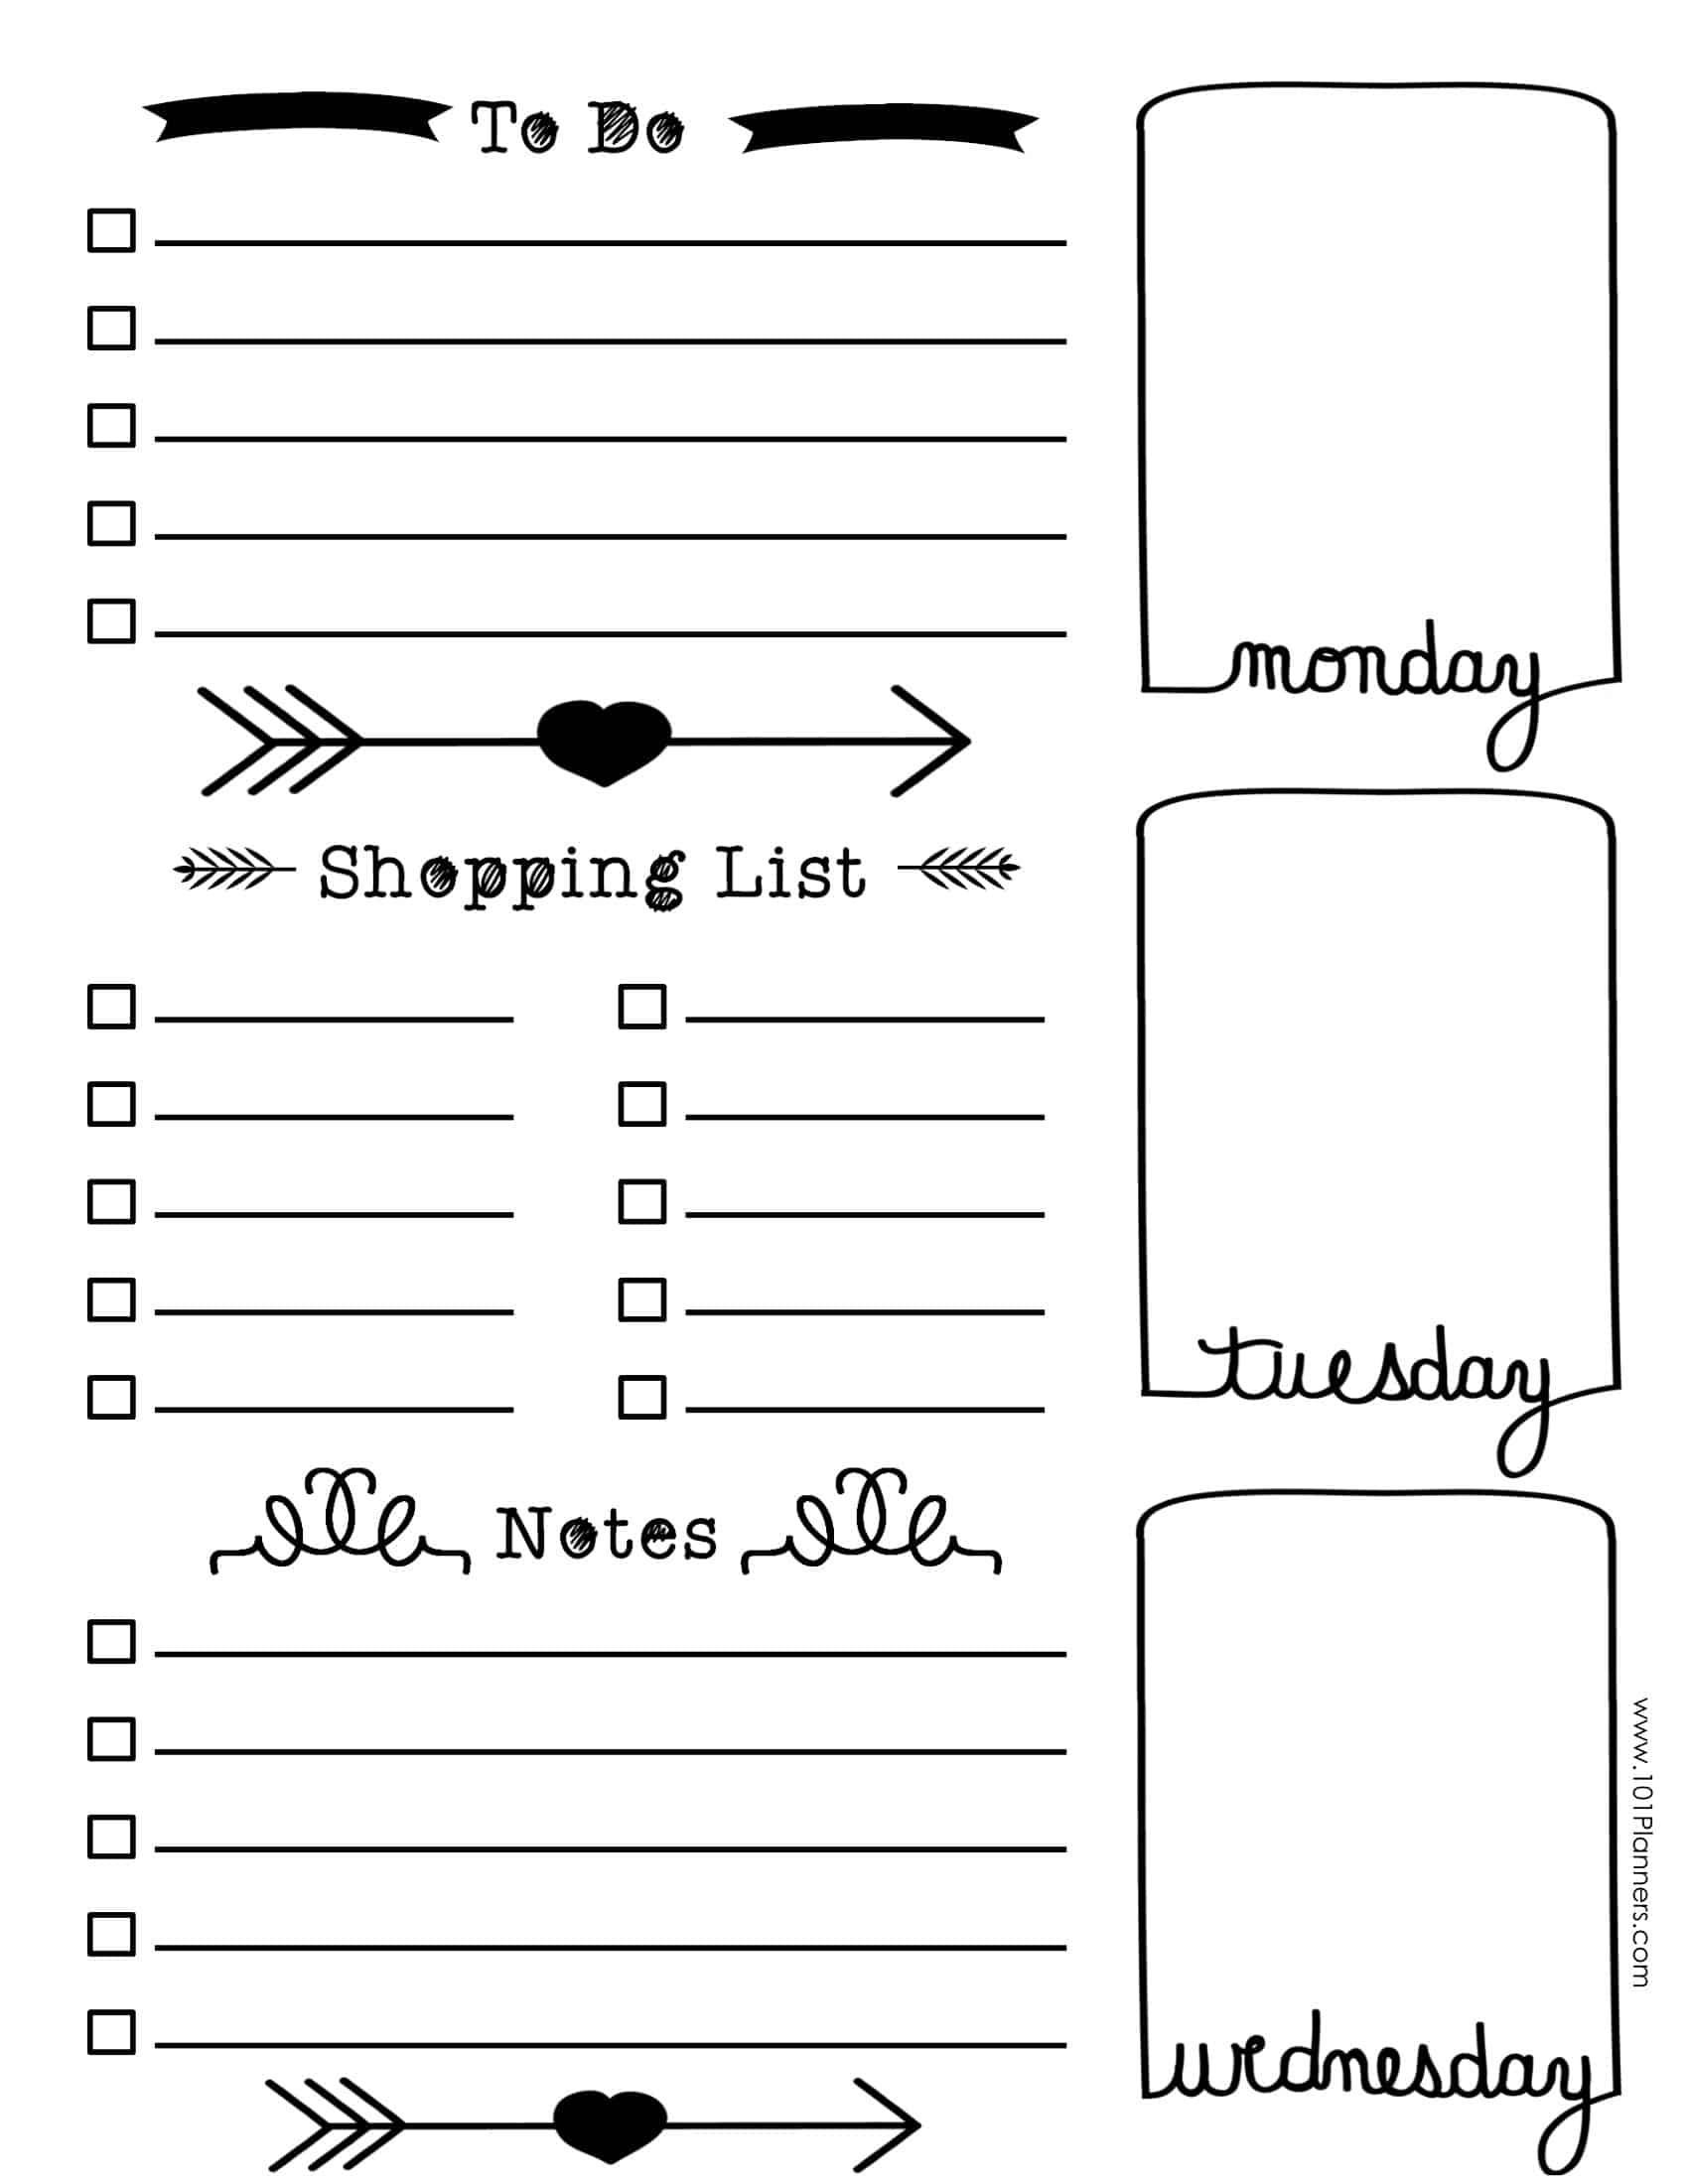 Free Bullet Journal Printables | Customize Online For Any Planner Size - Free Printable Journal Templates